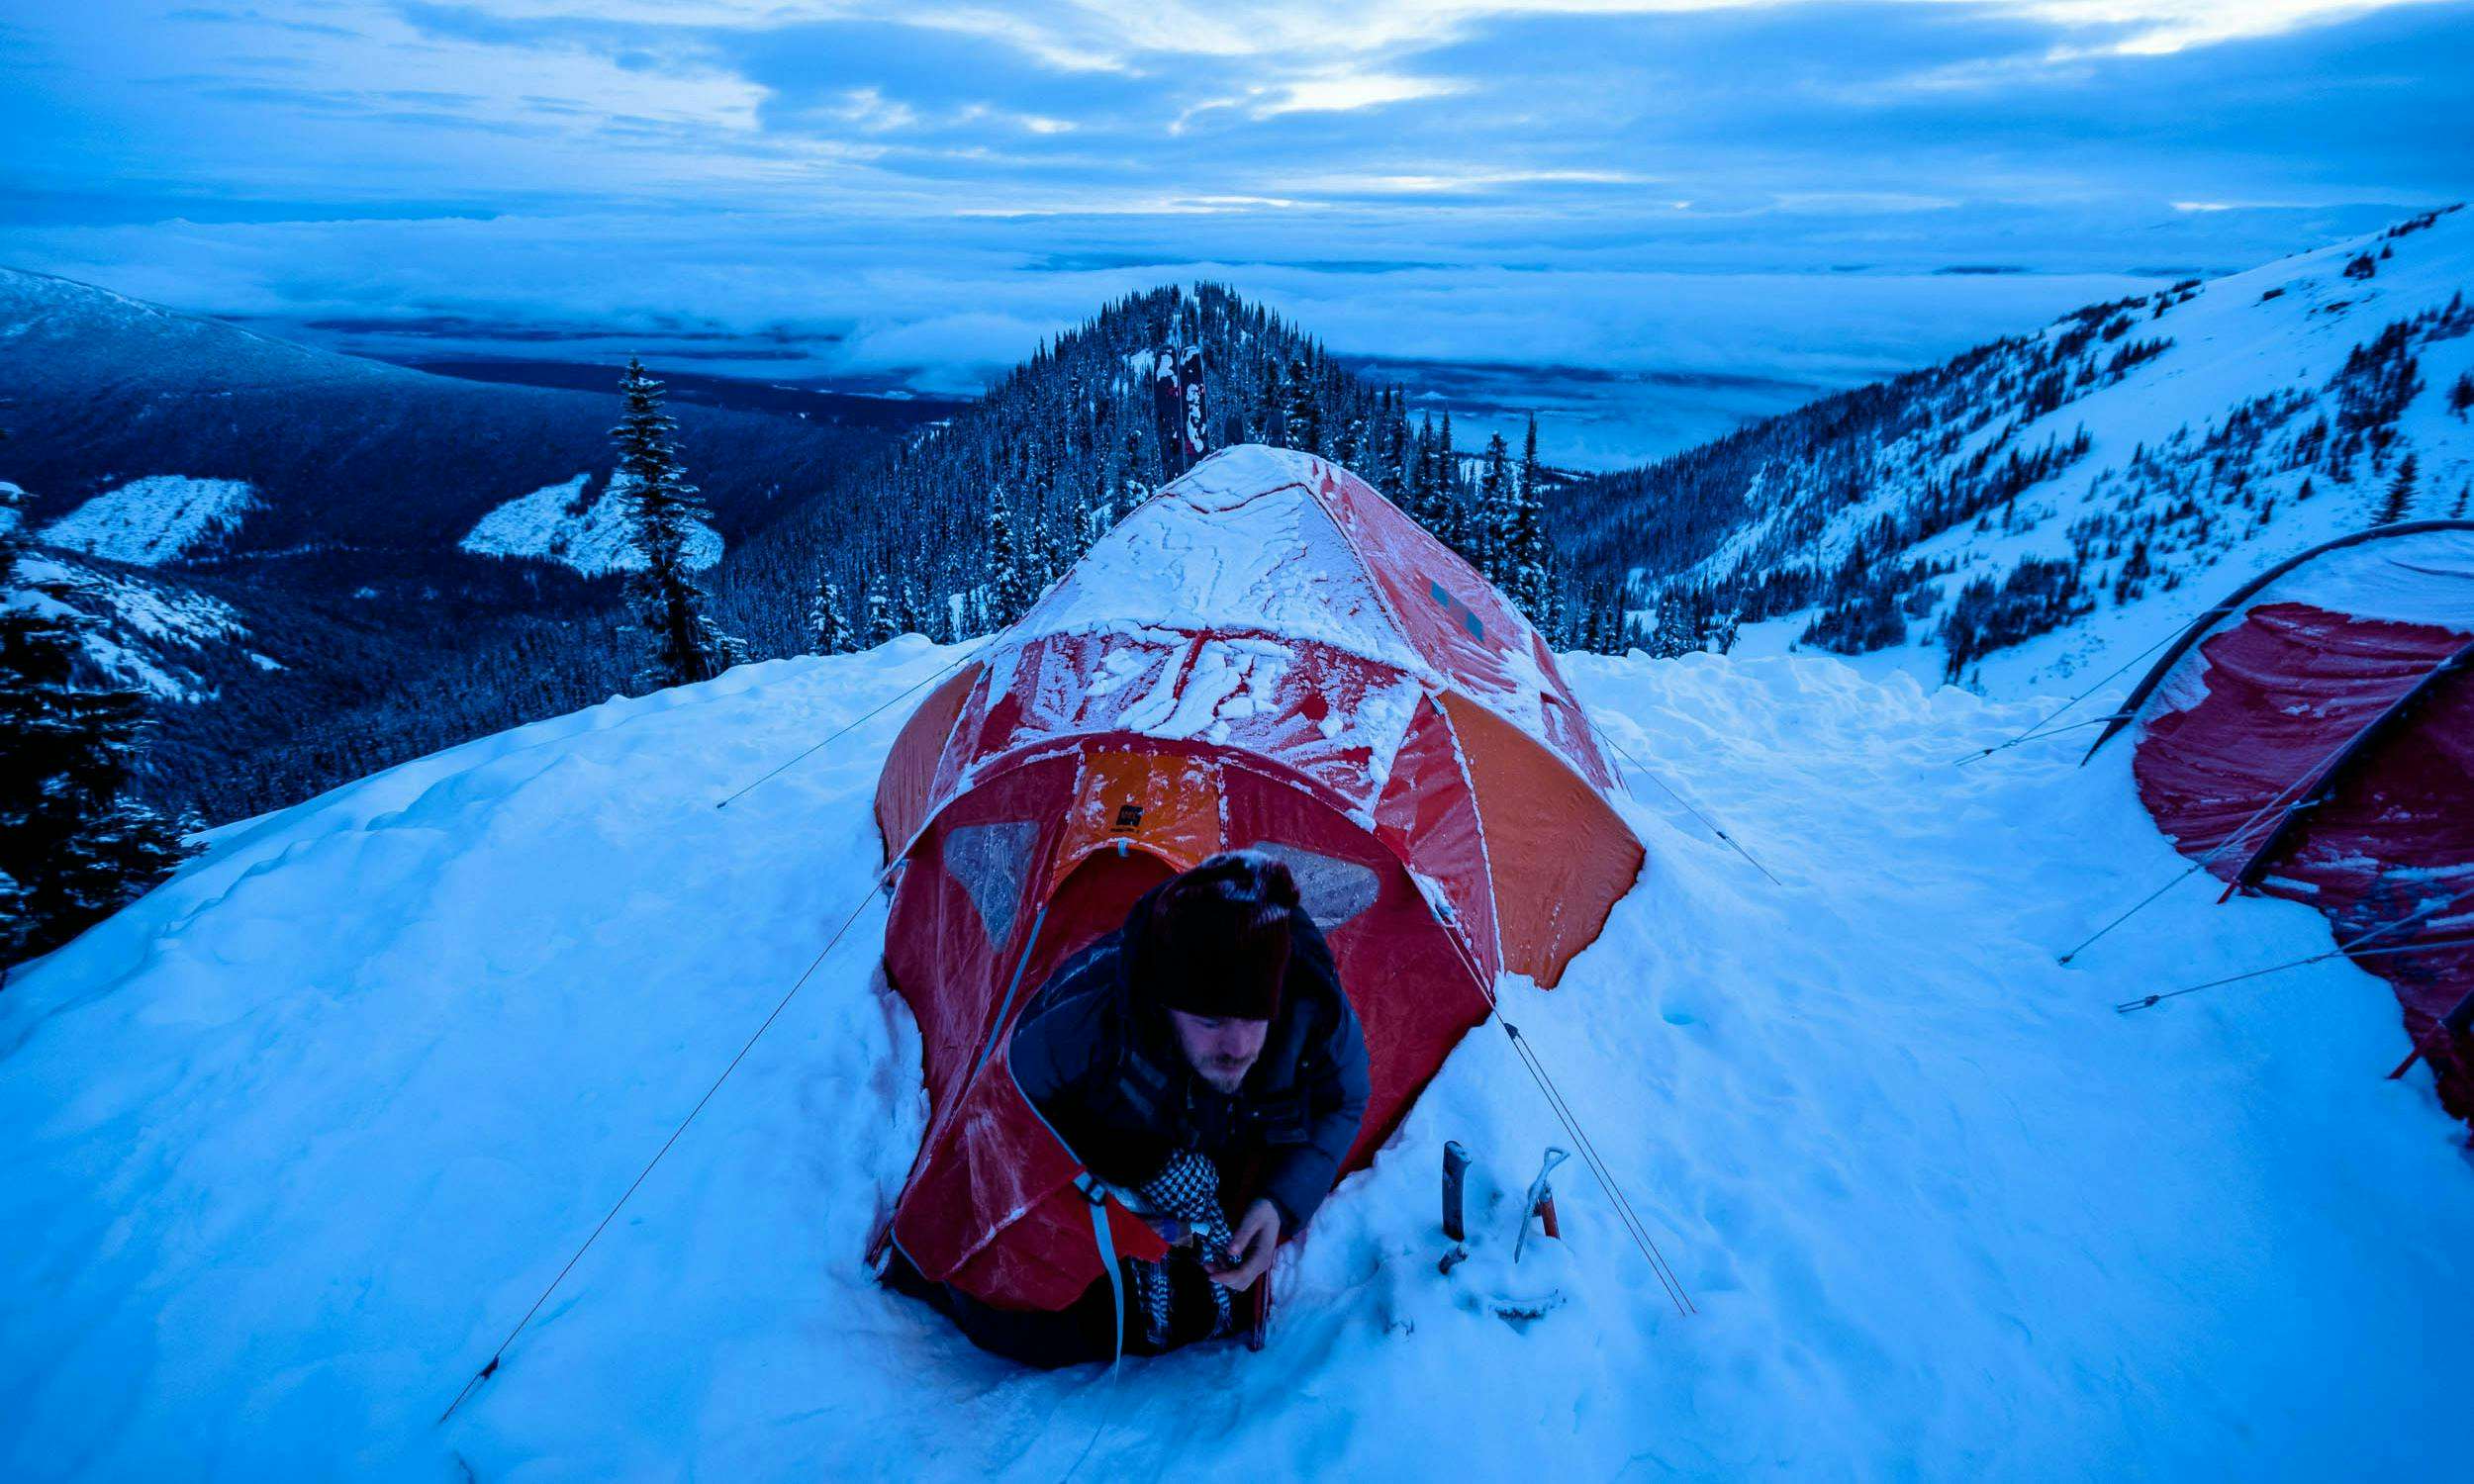 A man leans out of an orange tent perched on a snowy mountain, with a view spread behind him.